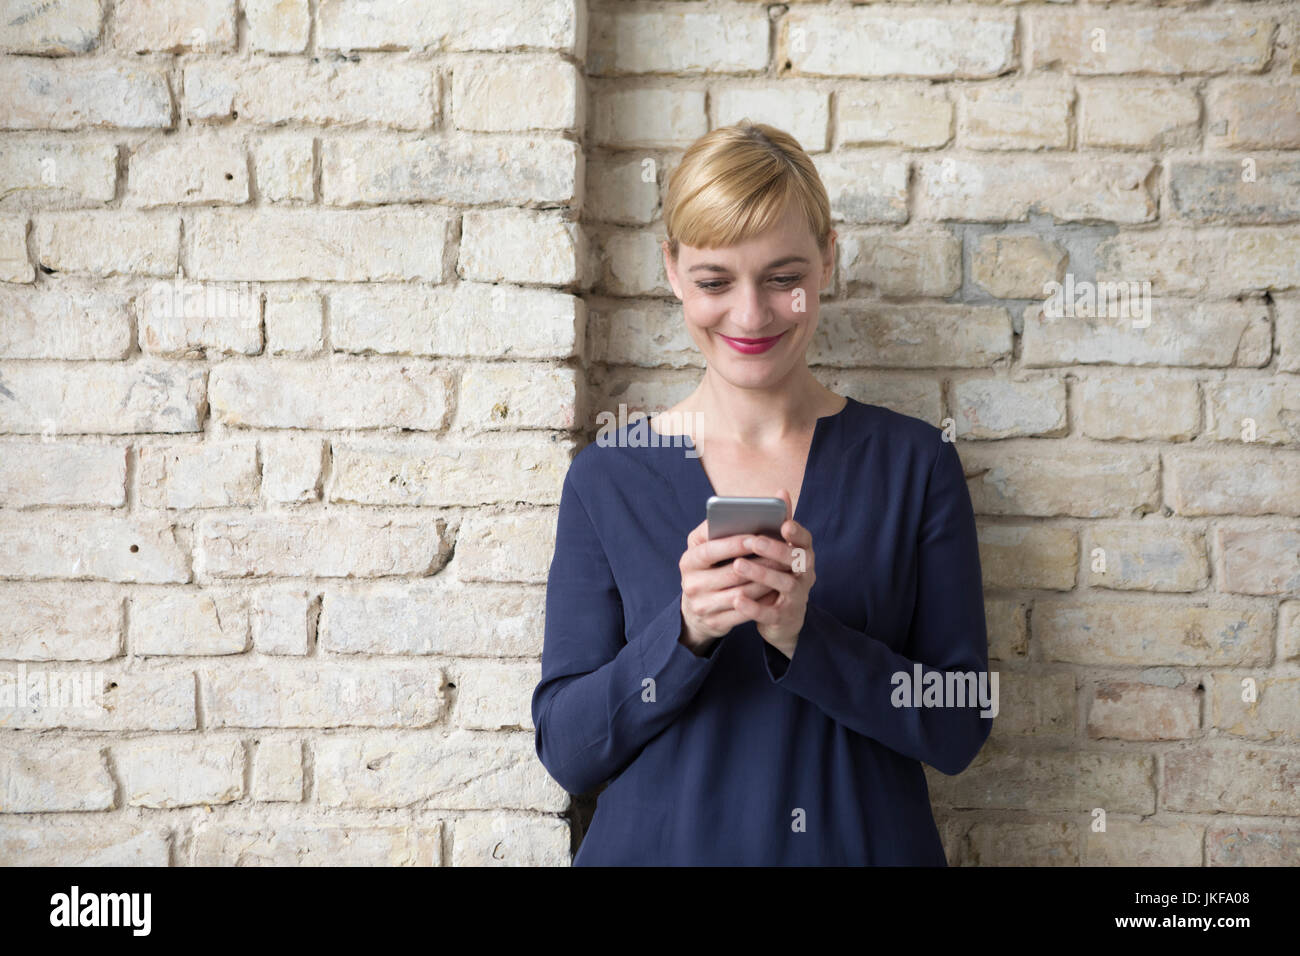 Businesswoman leaning against brick wall, using smartphone Banque D'Images